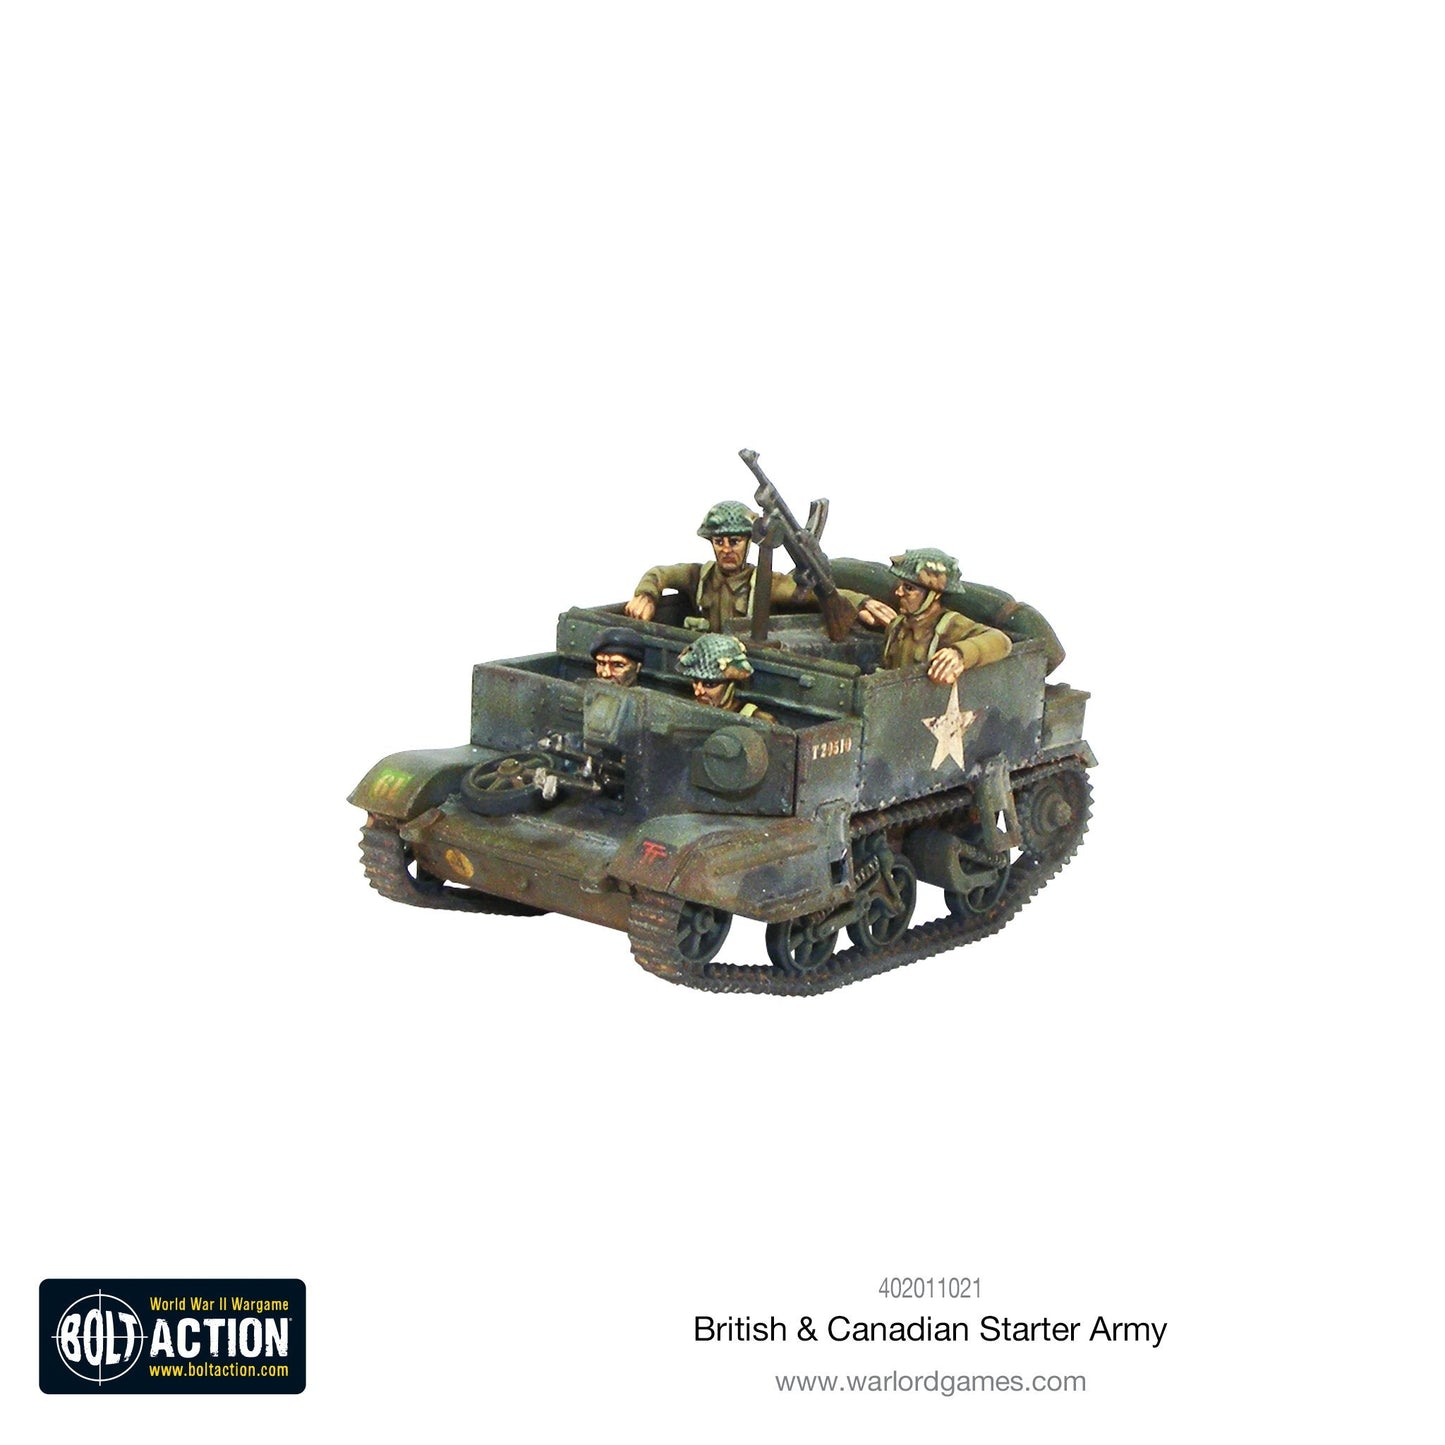 Bolt Action: British & Canadian Army (1943-45) Starter Army